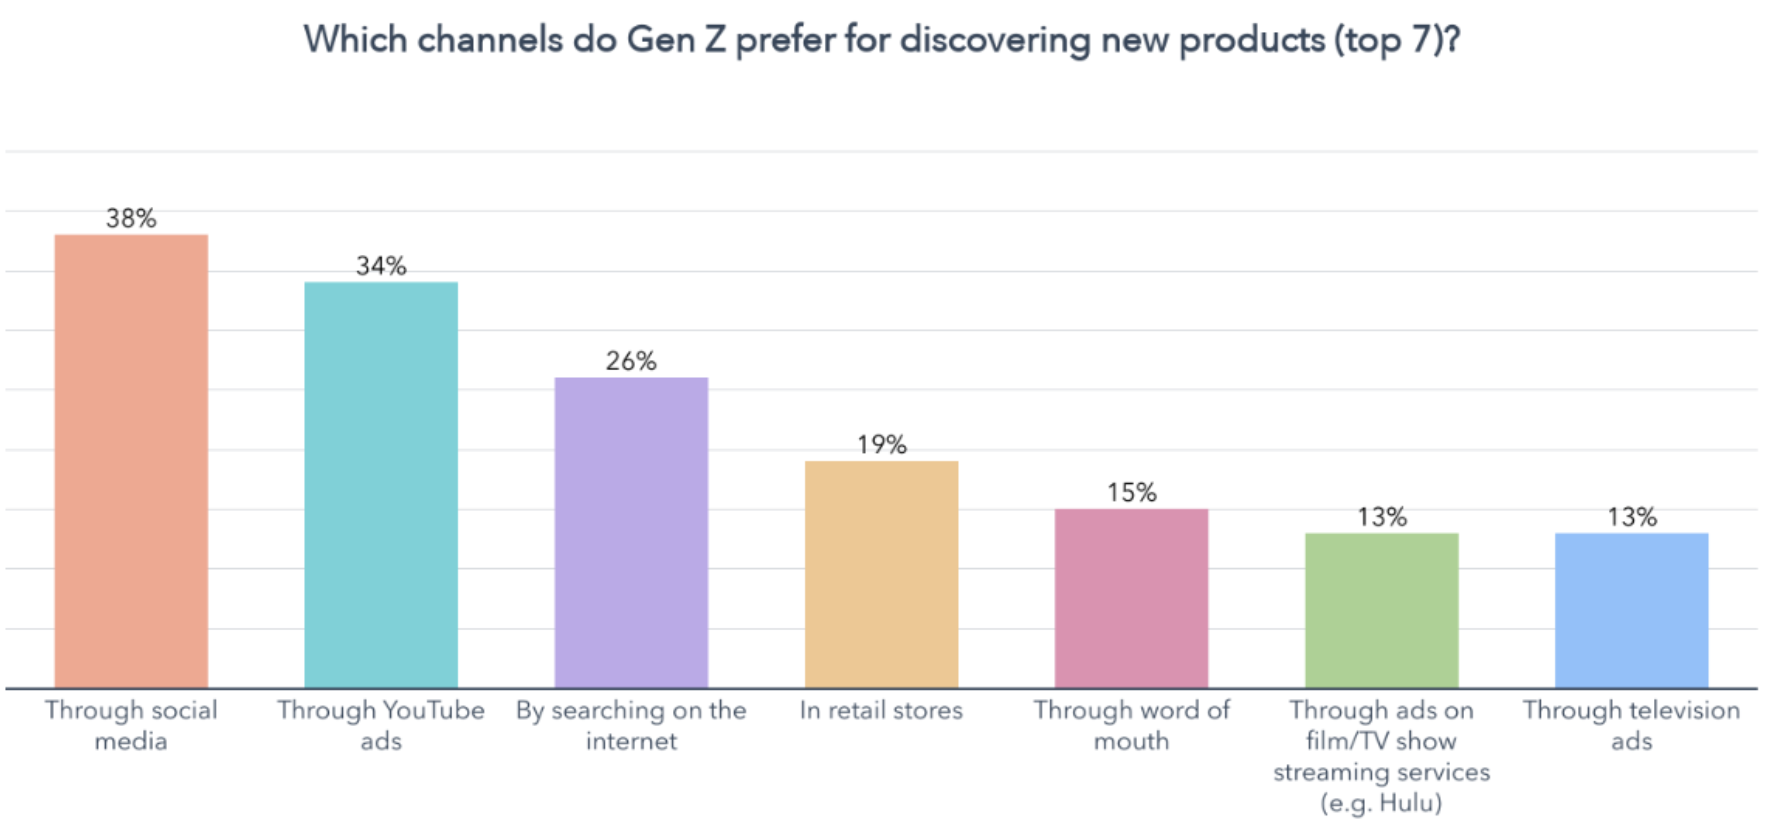 Graph showing the top 7 channels Gen Z prefers to discover new products. 